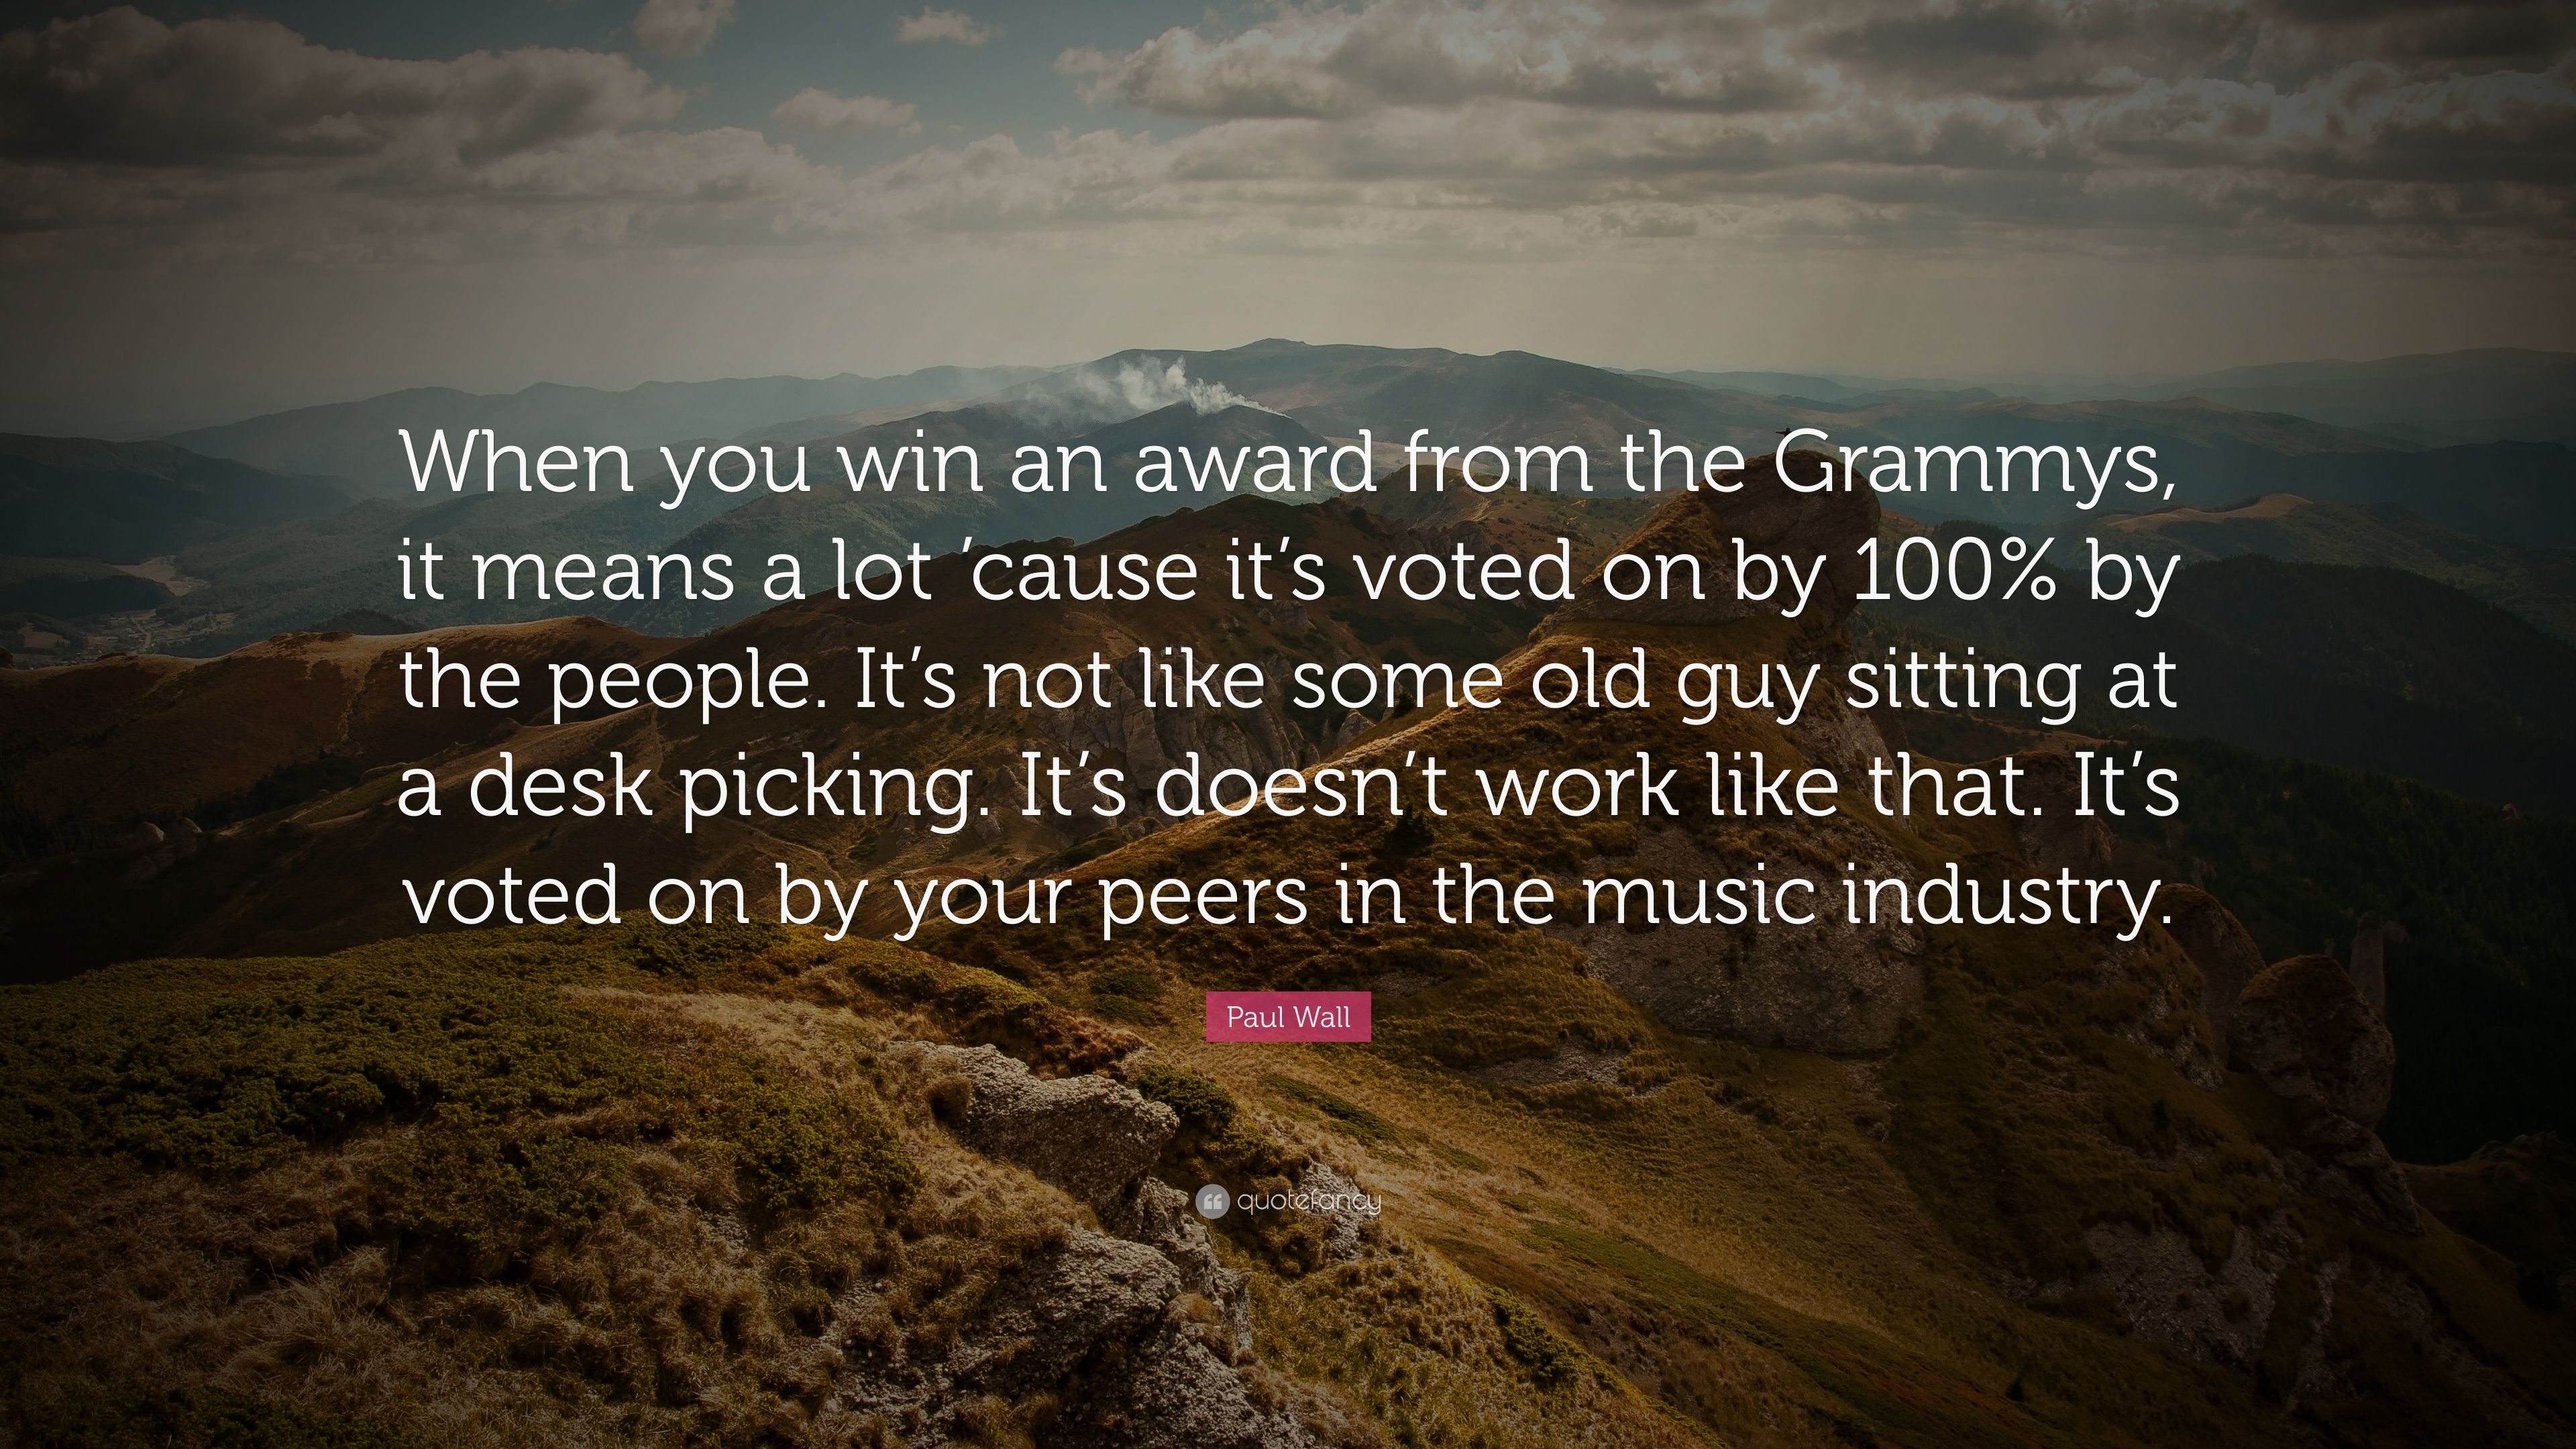 Paul Wall Quote: “When you win an award from the Grammys, it means